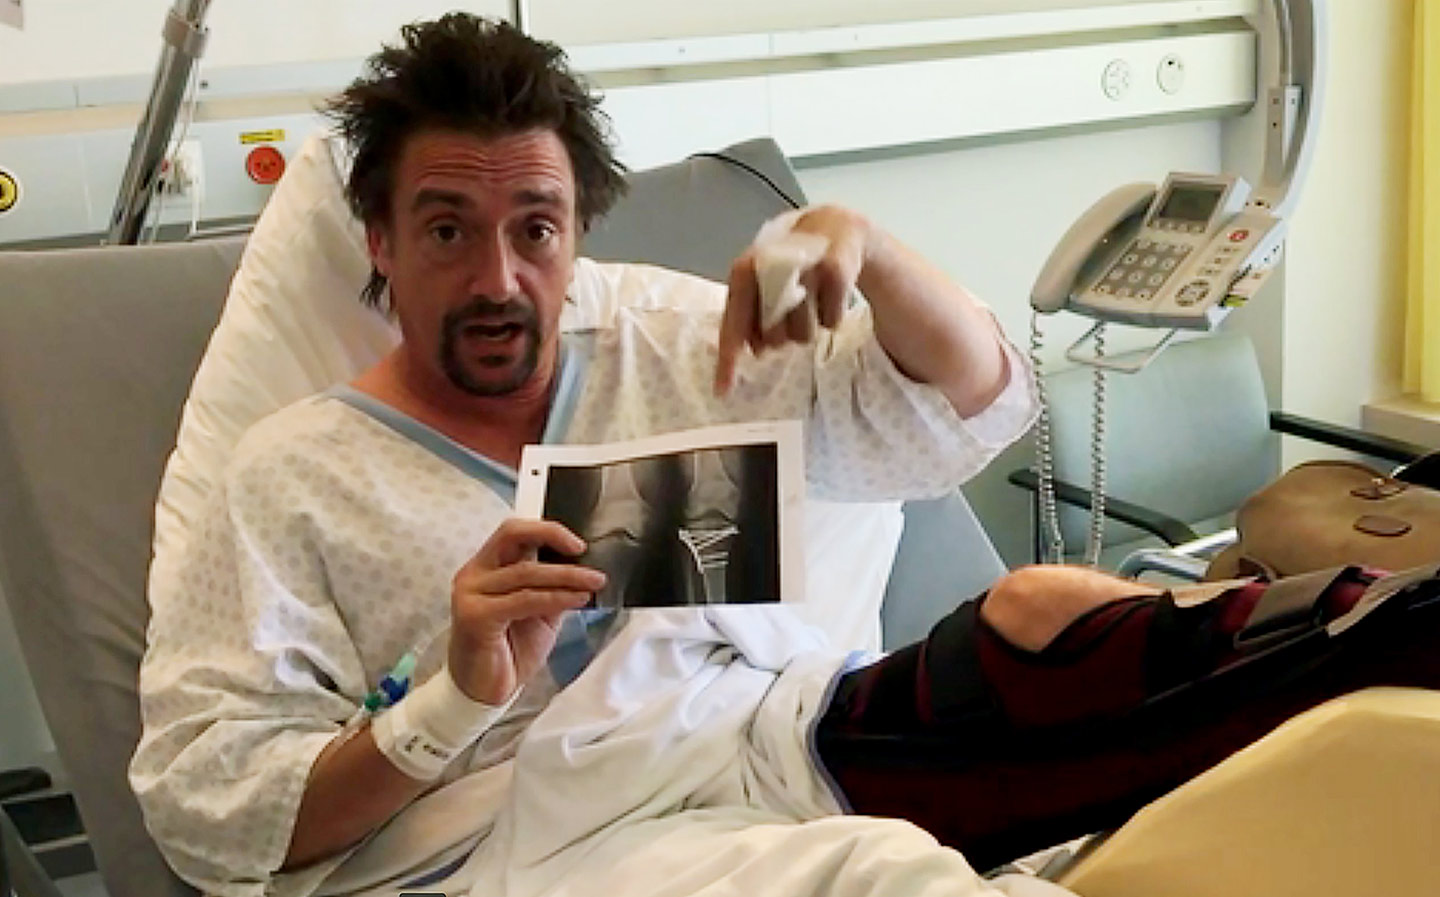 Jeremy Clarkson on Richard Hammond's crash in the Rimac Concept_One electric supercar: Hammond in hospital